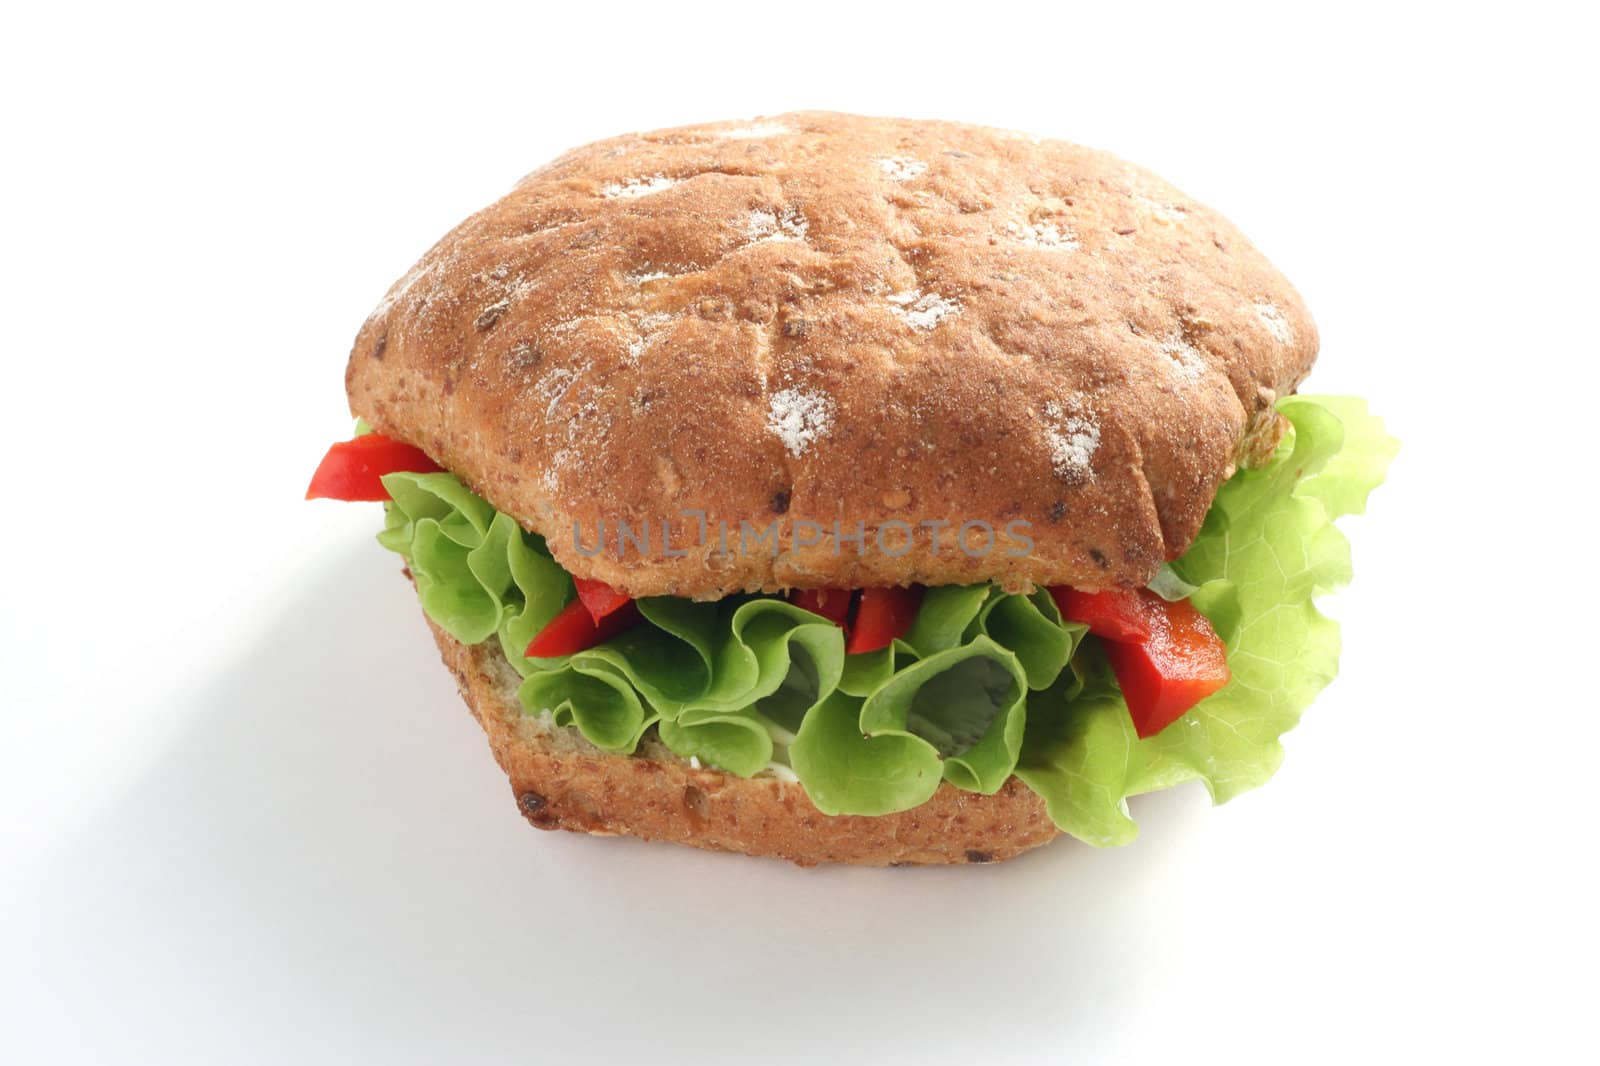 sandwich with vegetables